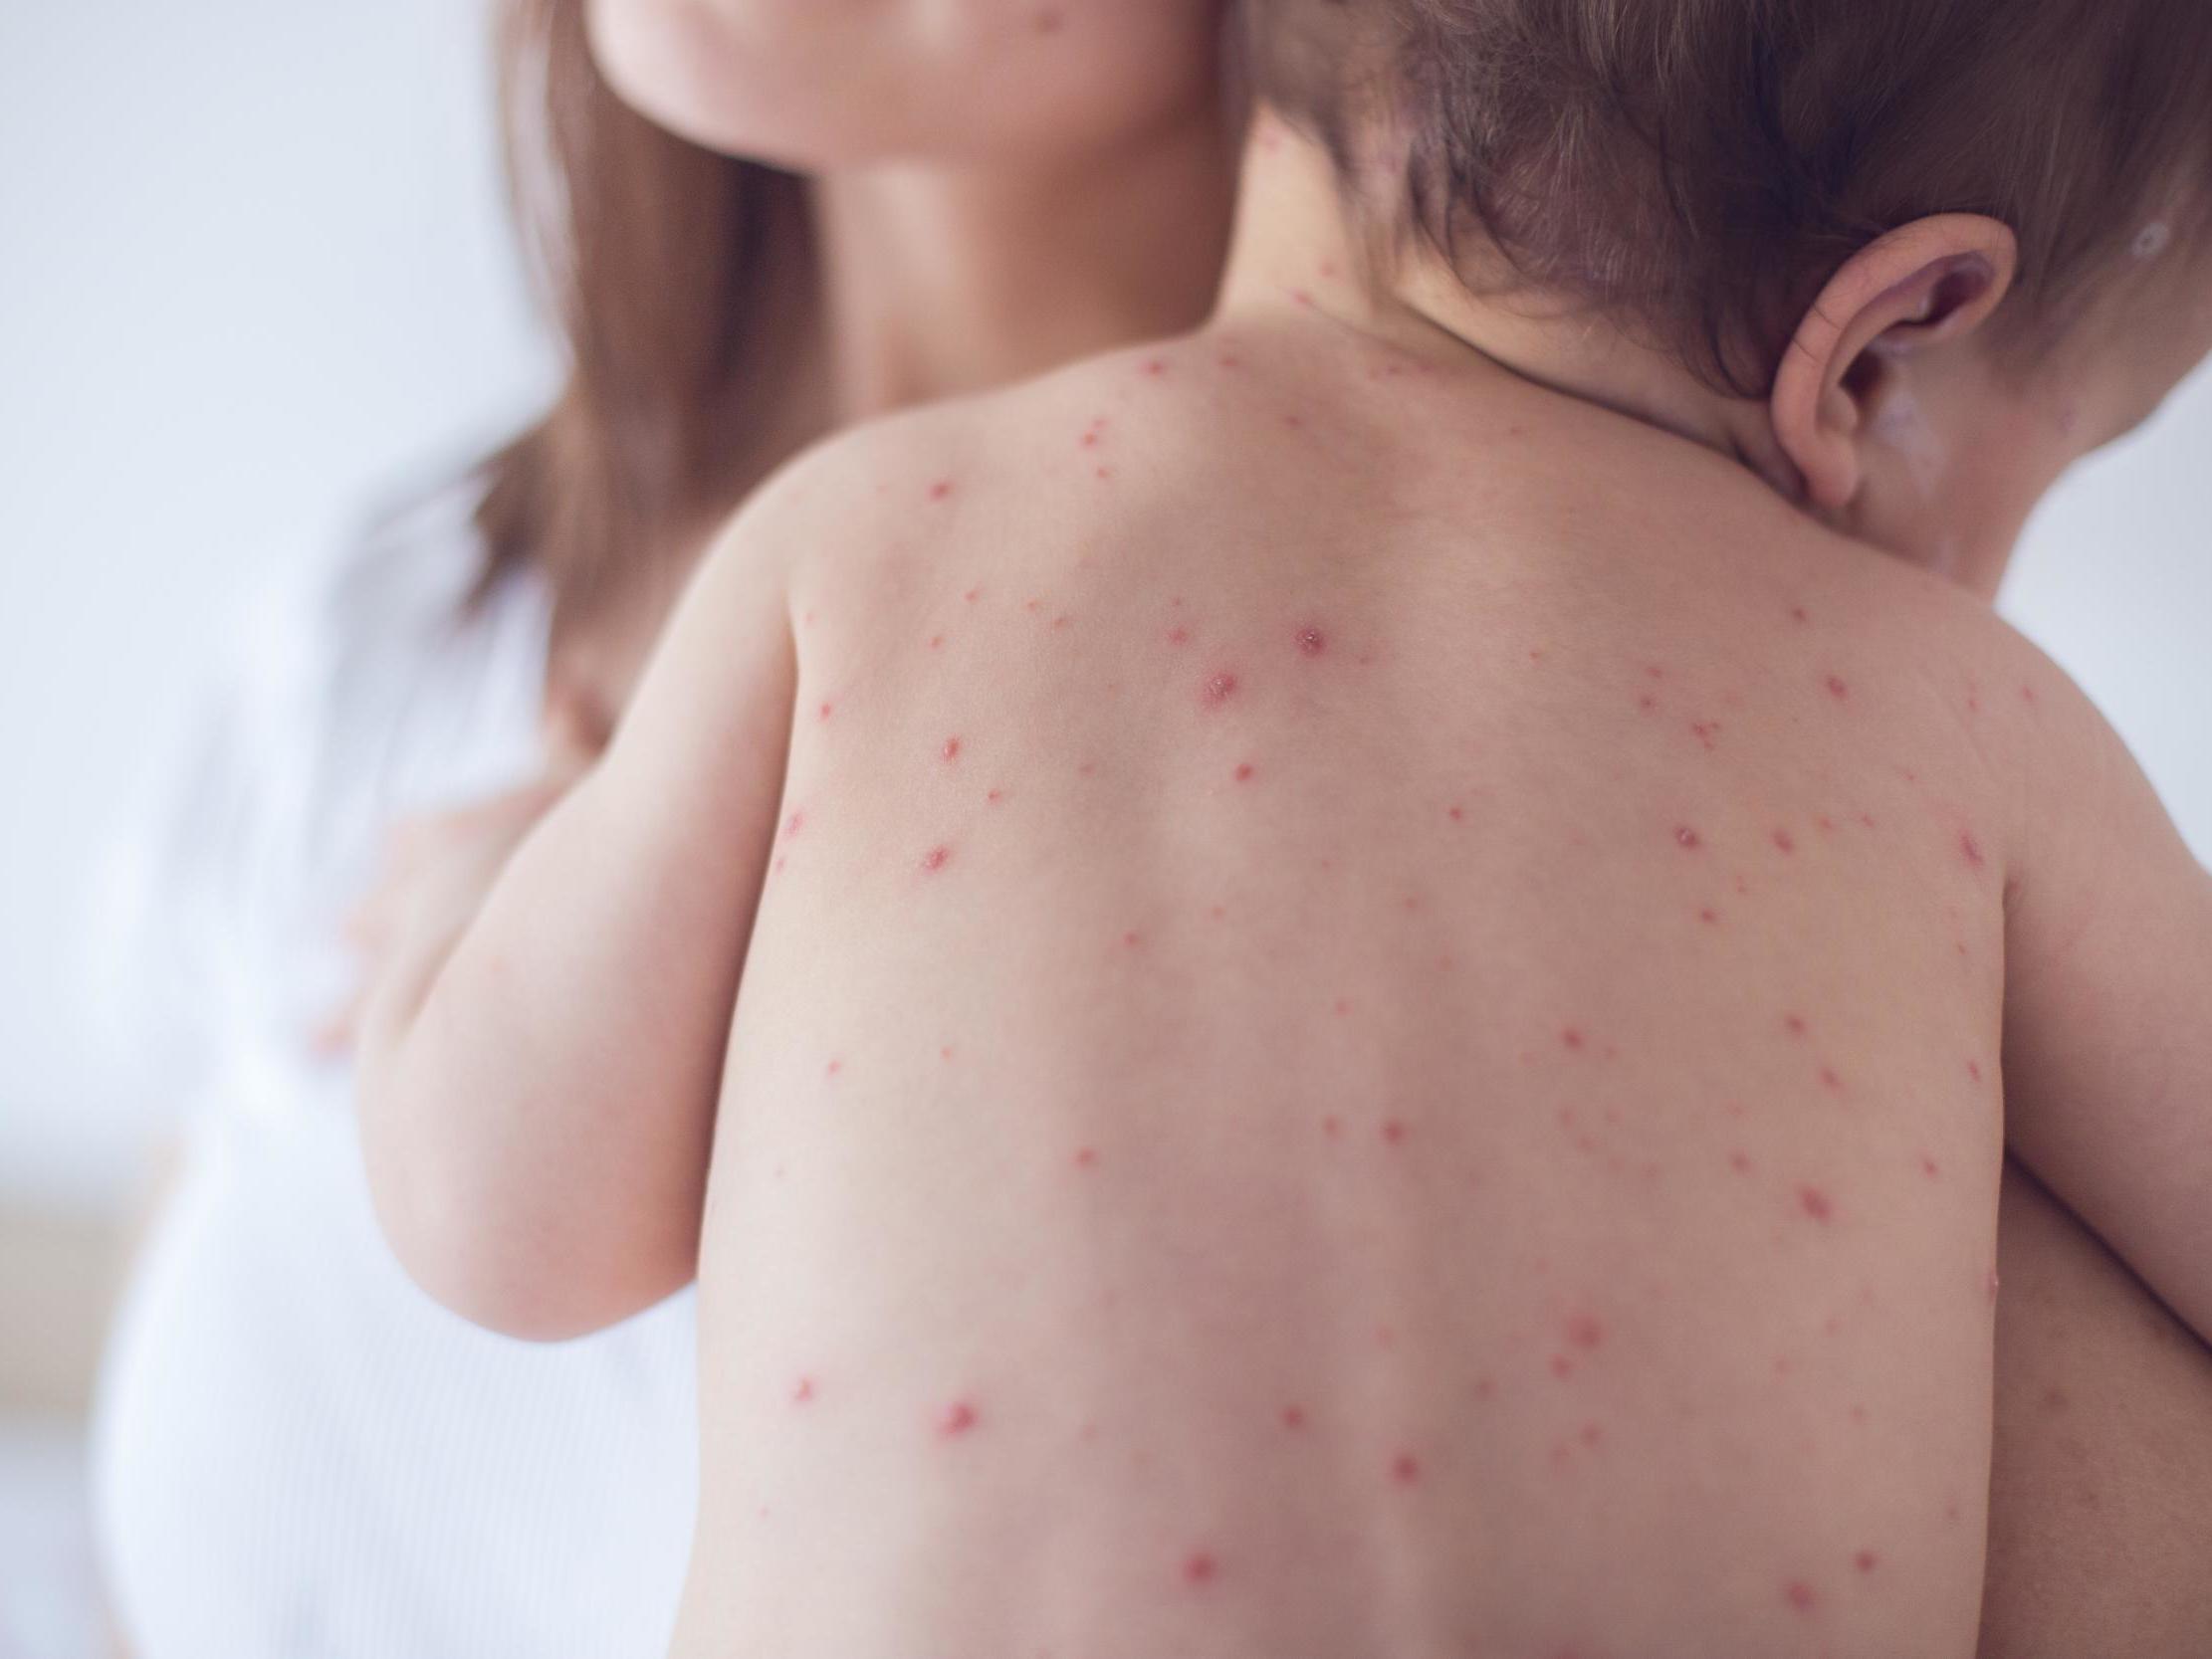 More than 140,000 people died from measles in 2018, according to estimates from WHO